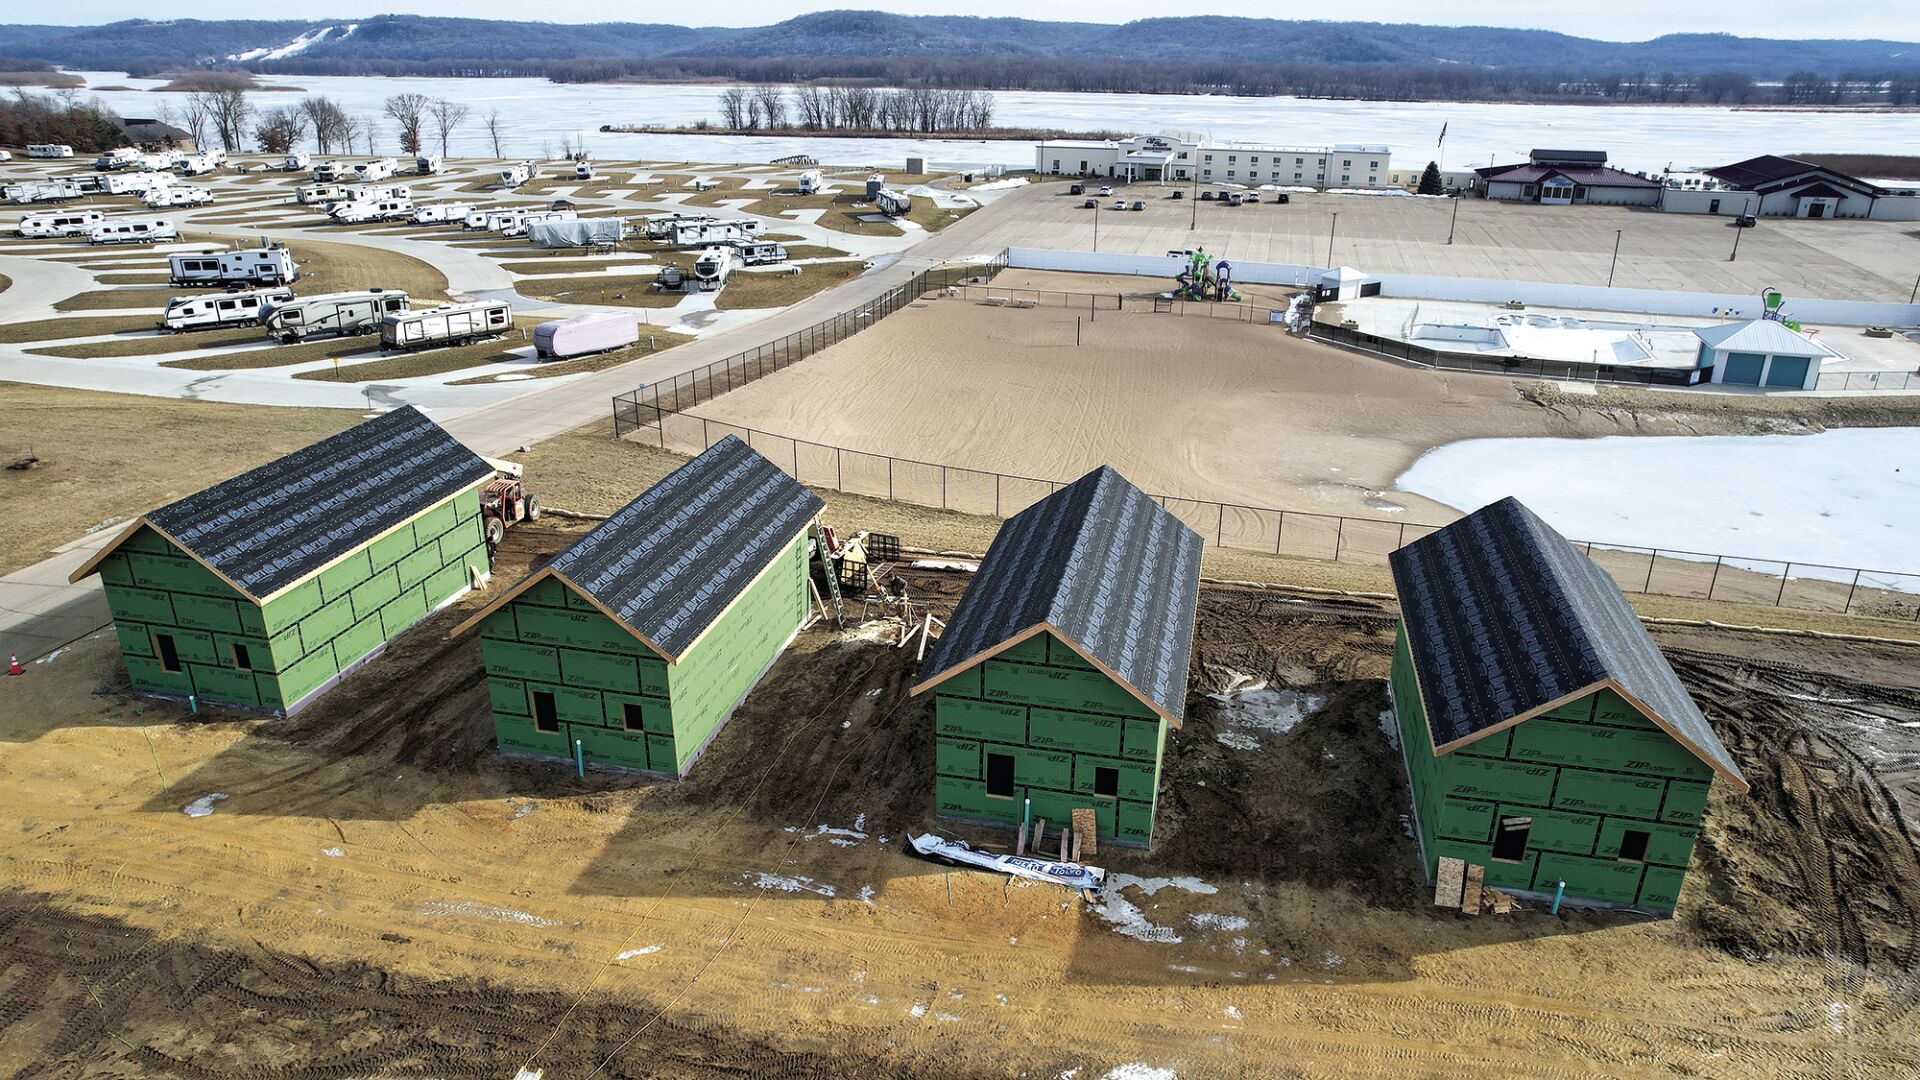 Construction crews work on building four villas at the Off Shore Hotel & Resort in Bellevue, Iowa, last week. The new villas are located on the southeast side of the resort, with views of the Mississippi River.    PHOTO CREDIT: Dave Kettering